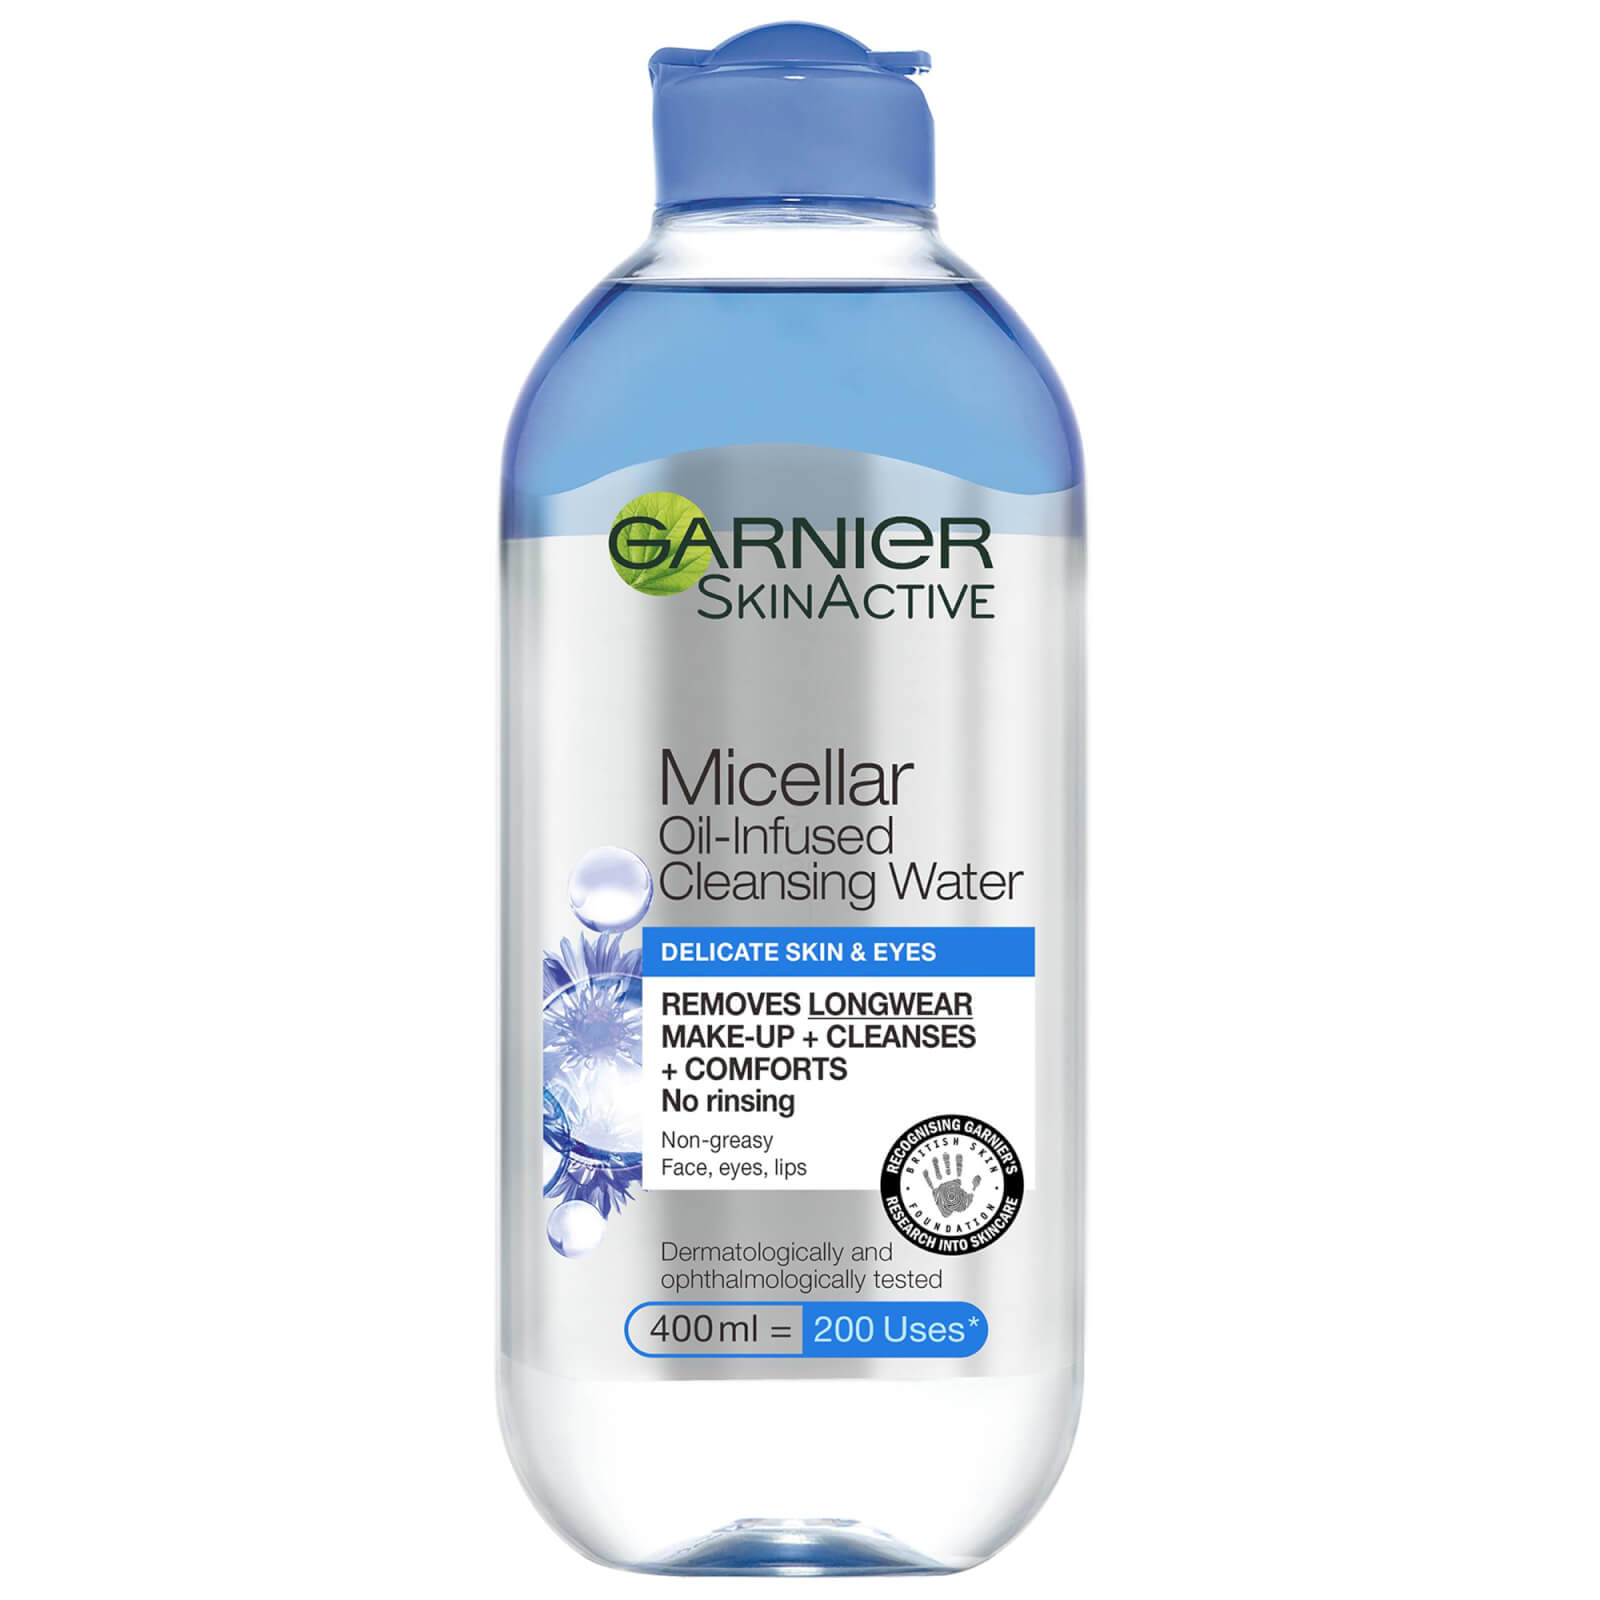 Garnier Micellar Water Facial Cleanser and Makeup Remover for Delicate Skin and Eyes 400ml von Garnier